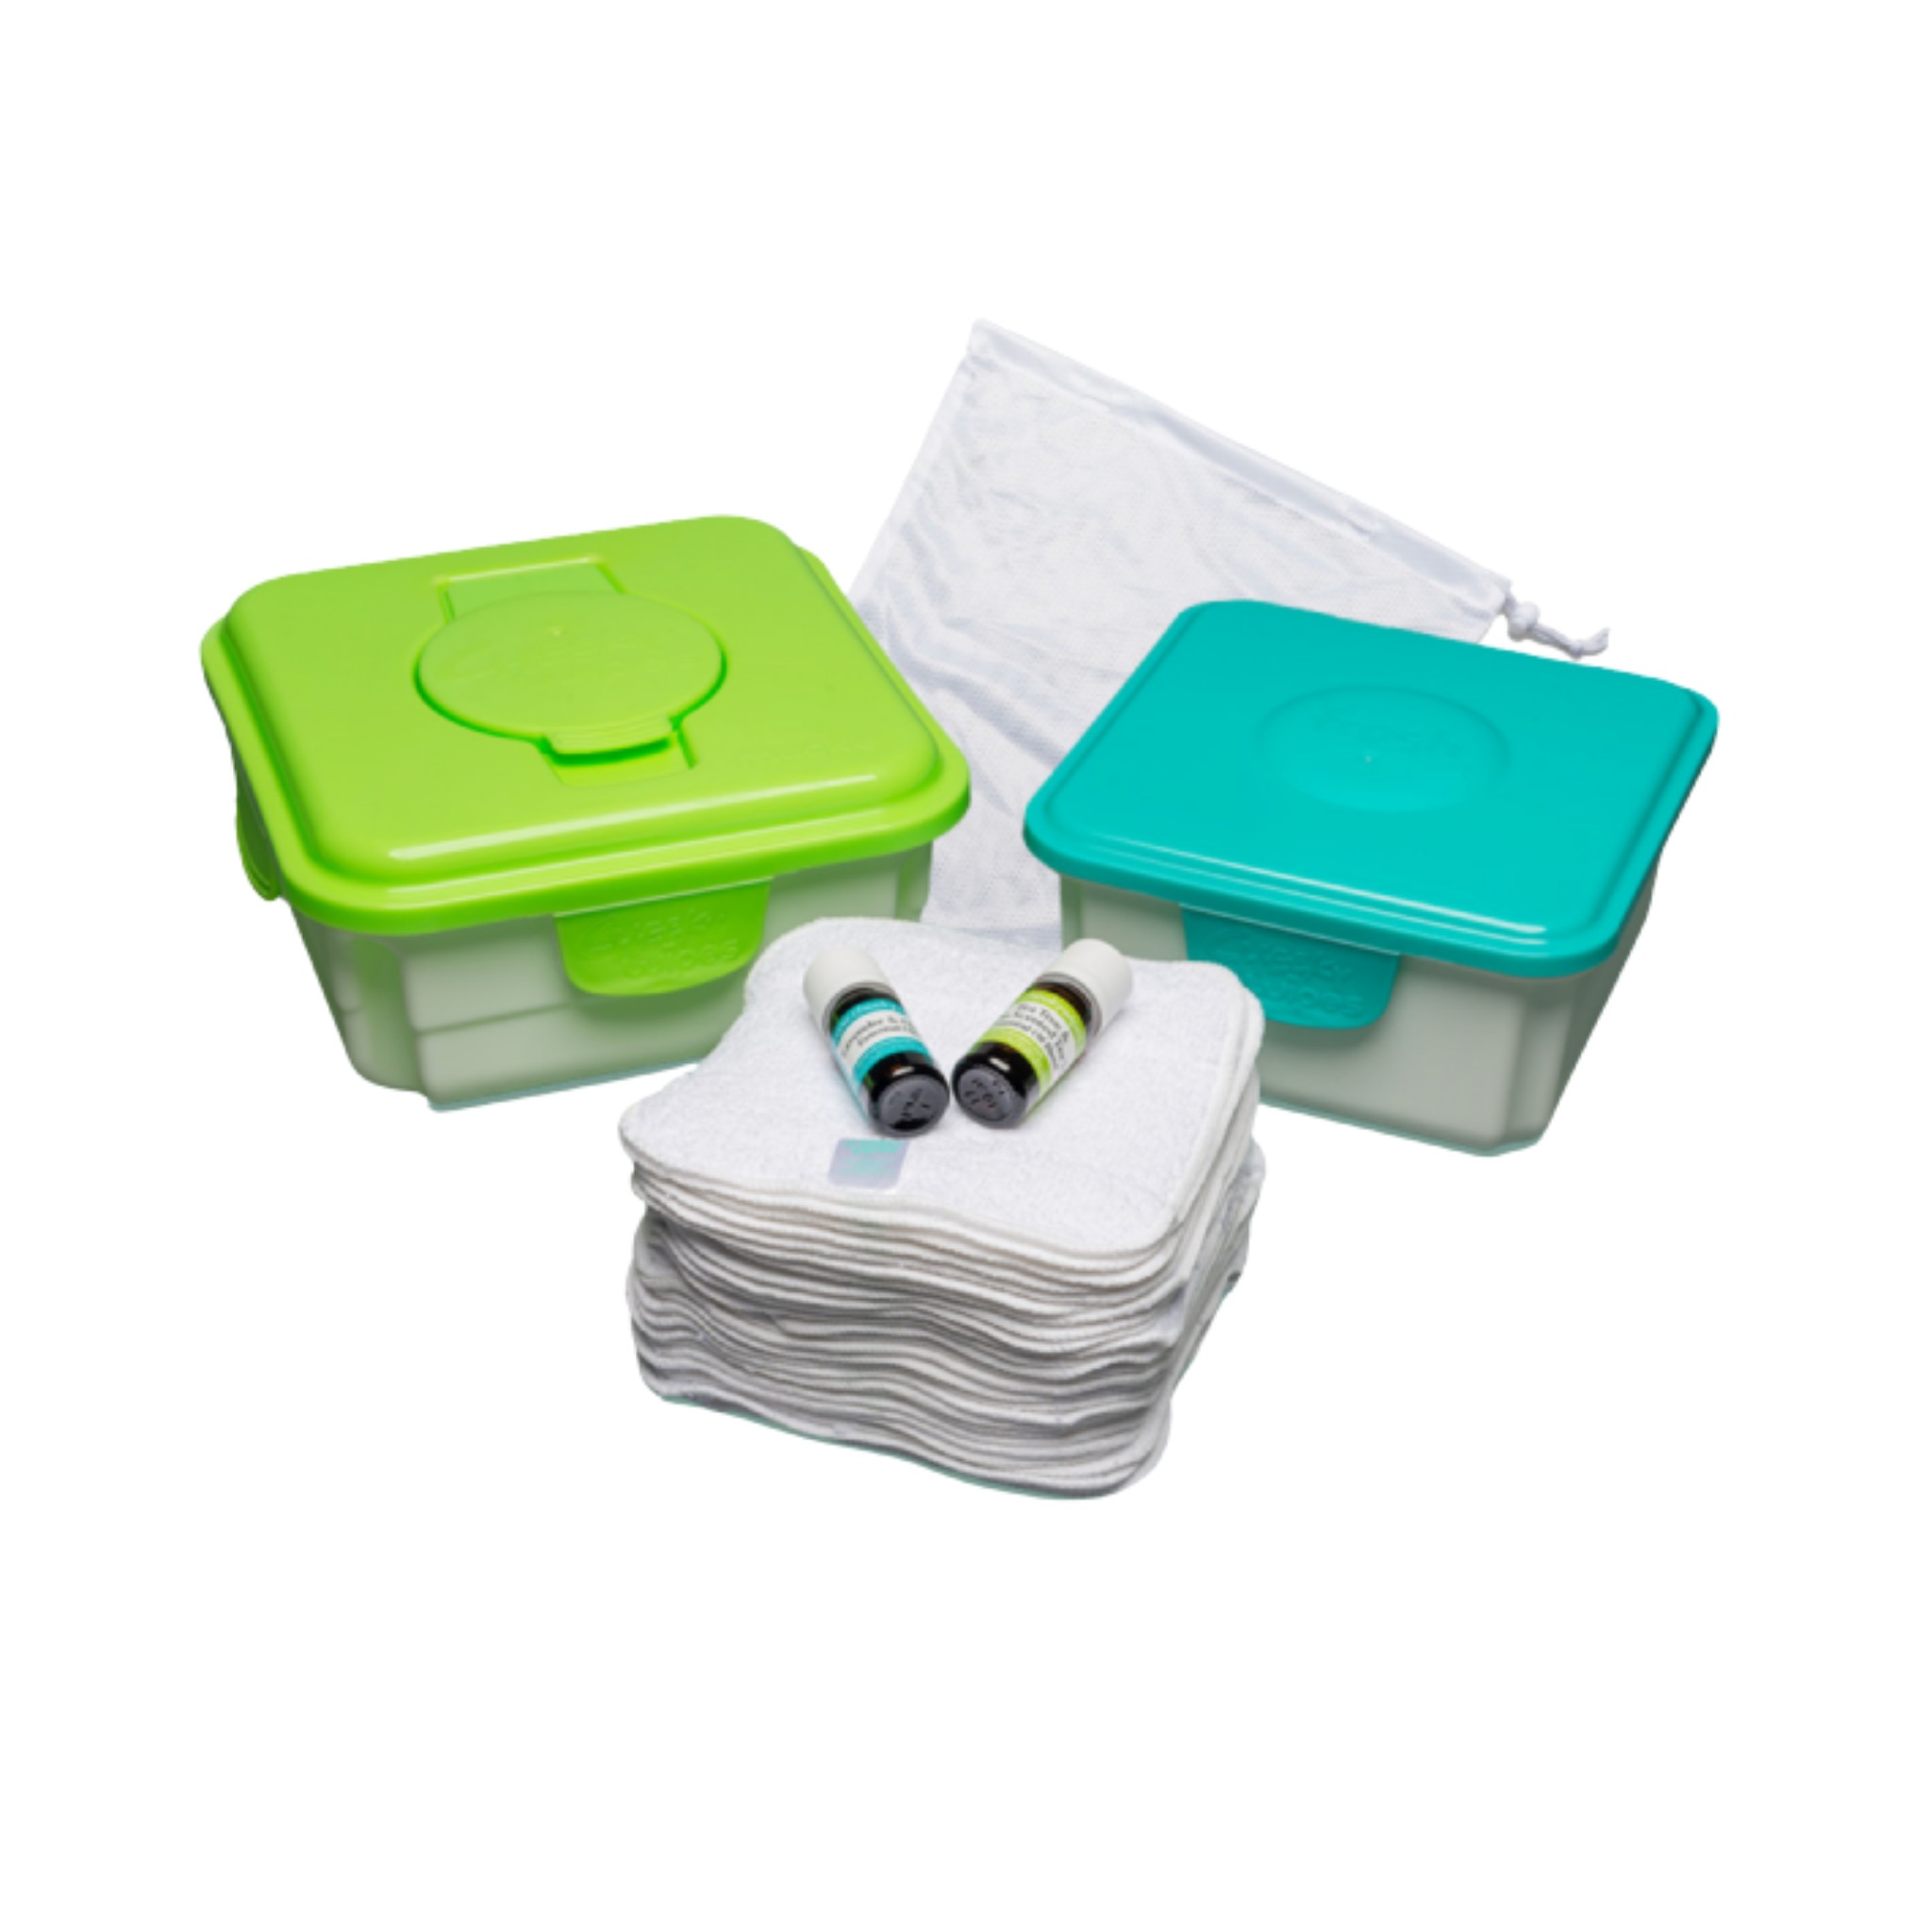 Cheeky Wipes washable wipes and kits – ERIC, The Children's Bowel